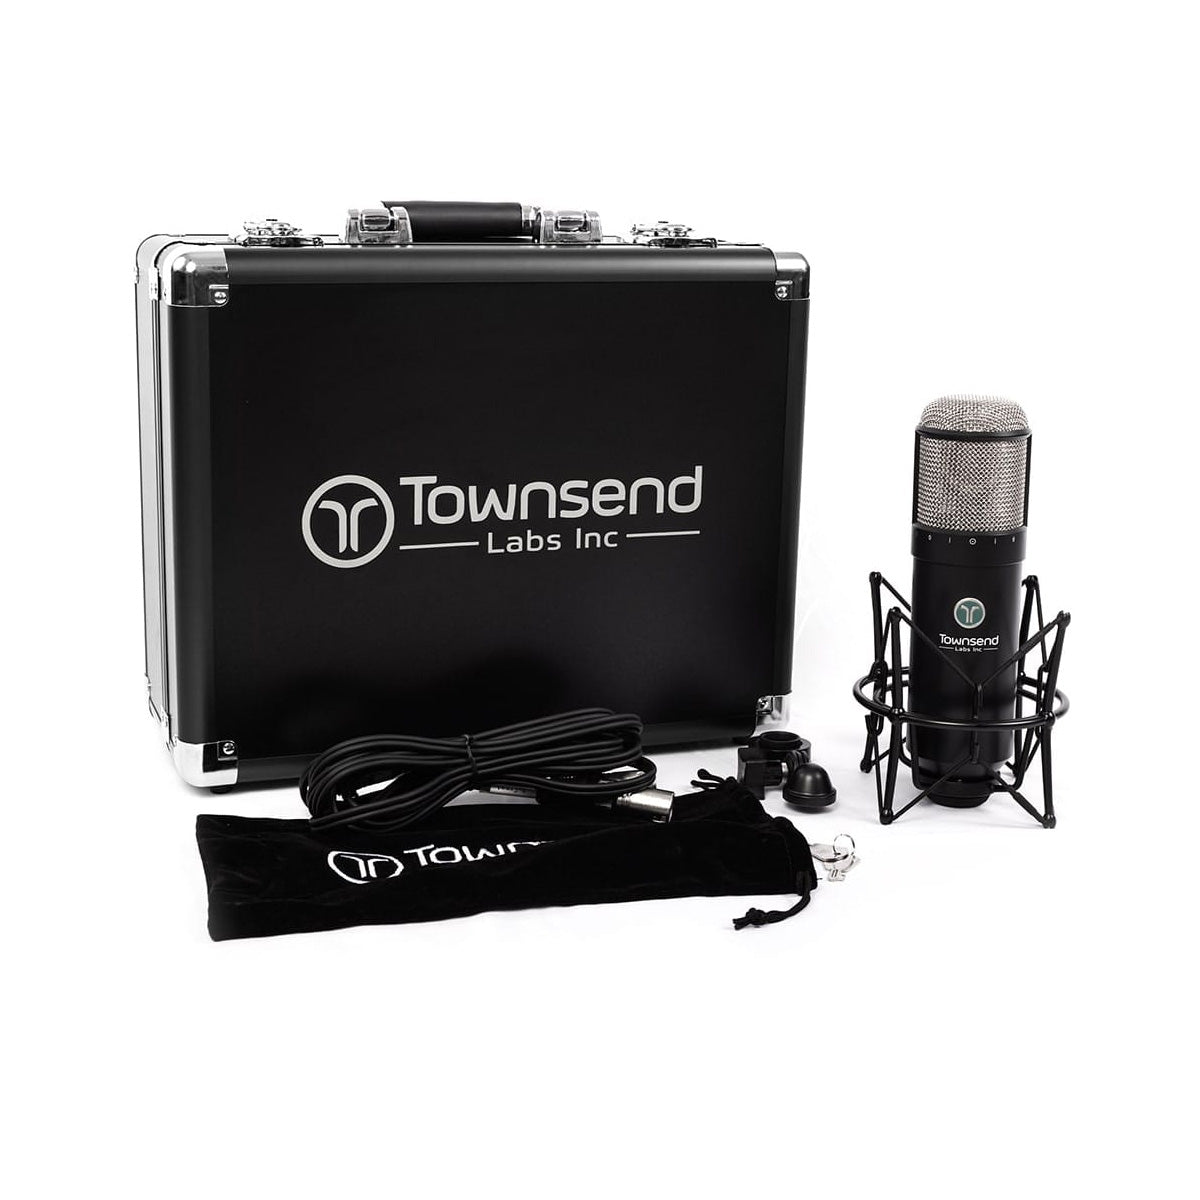 Universal Audio - Townsend Labs Sphere L22 Modelling Mic